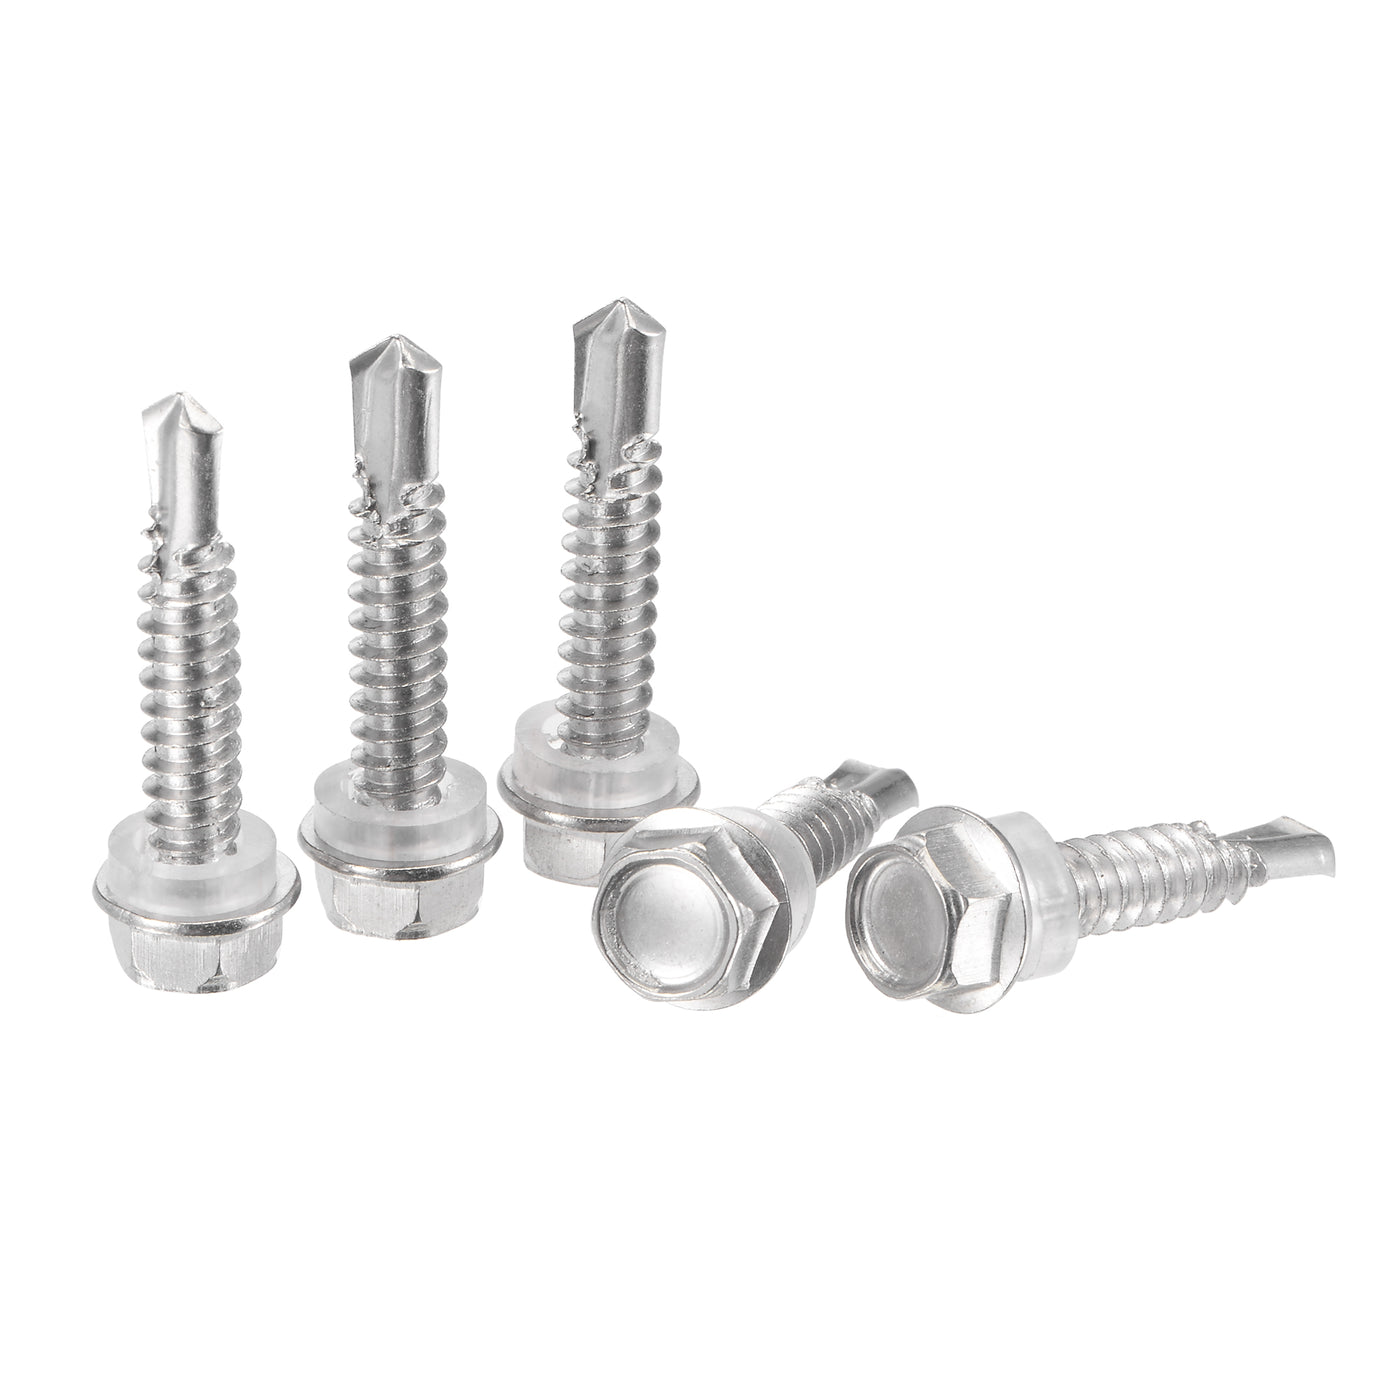 uxcell Uxcell #14 x 1 17/64" 410 Stainless Steel Hex Washer Head Self Drilling Screws 50pcs